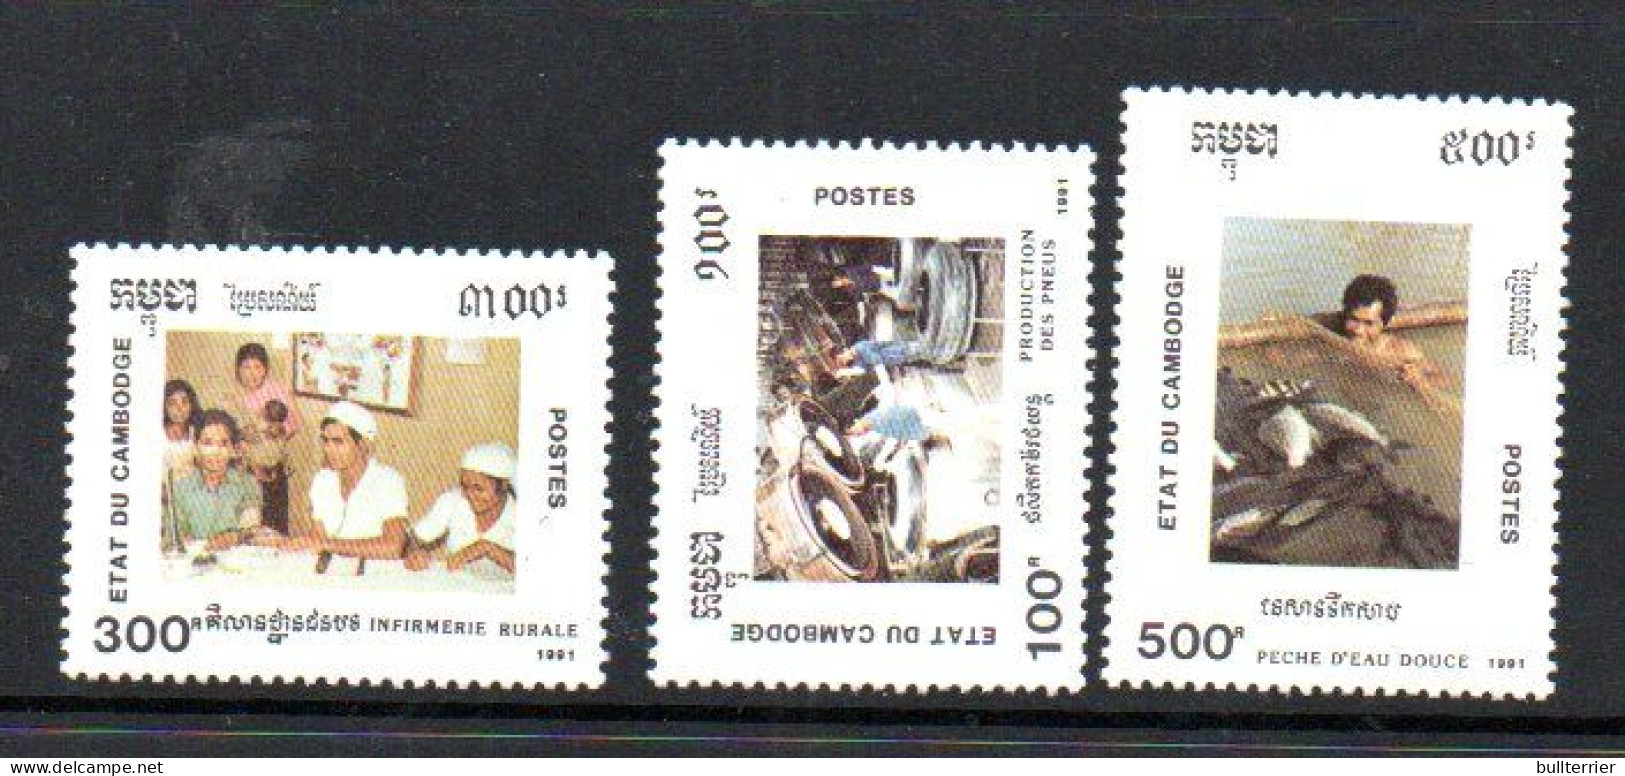 CAMBODIA - 1991  FOOD INDUSTRY  SET OF 3  MINT NEVER HINGED - Cambodia